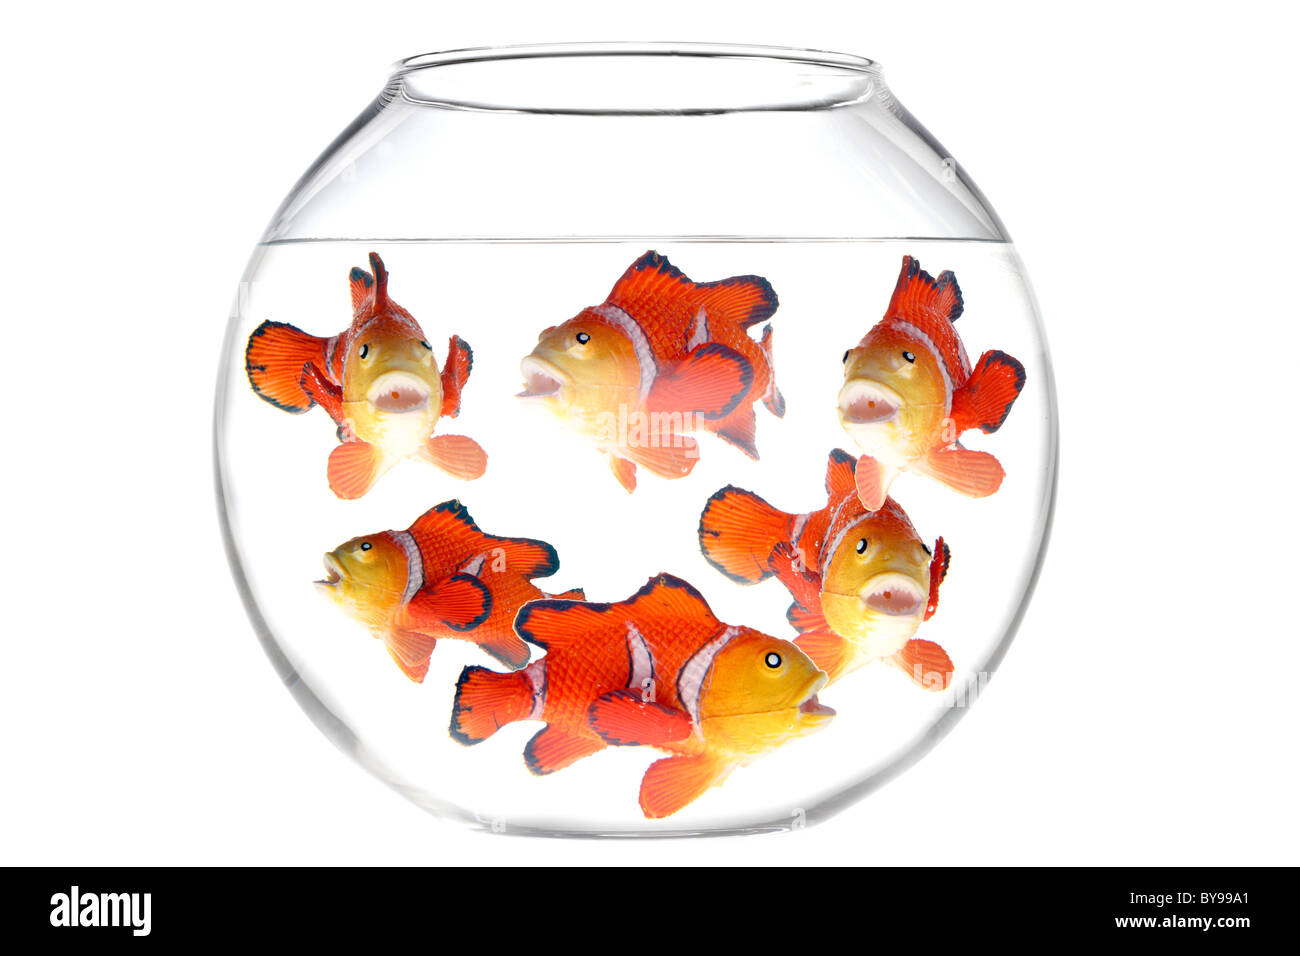 https://c8.alamy.com/comp/BY99A1/fish-in-a-fish-bowl-plastic-toy-BY99A1.jpg